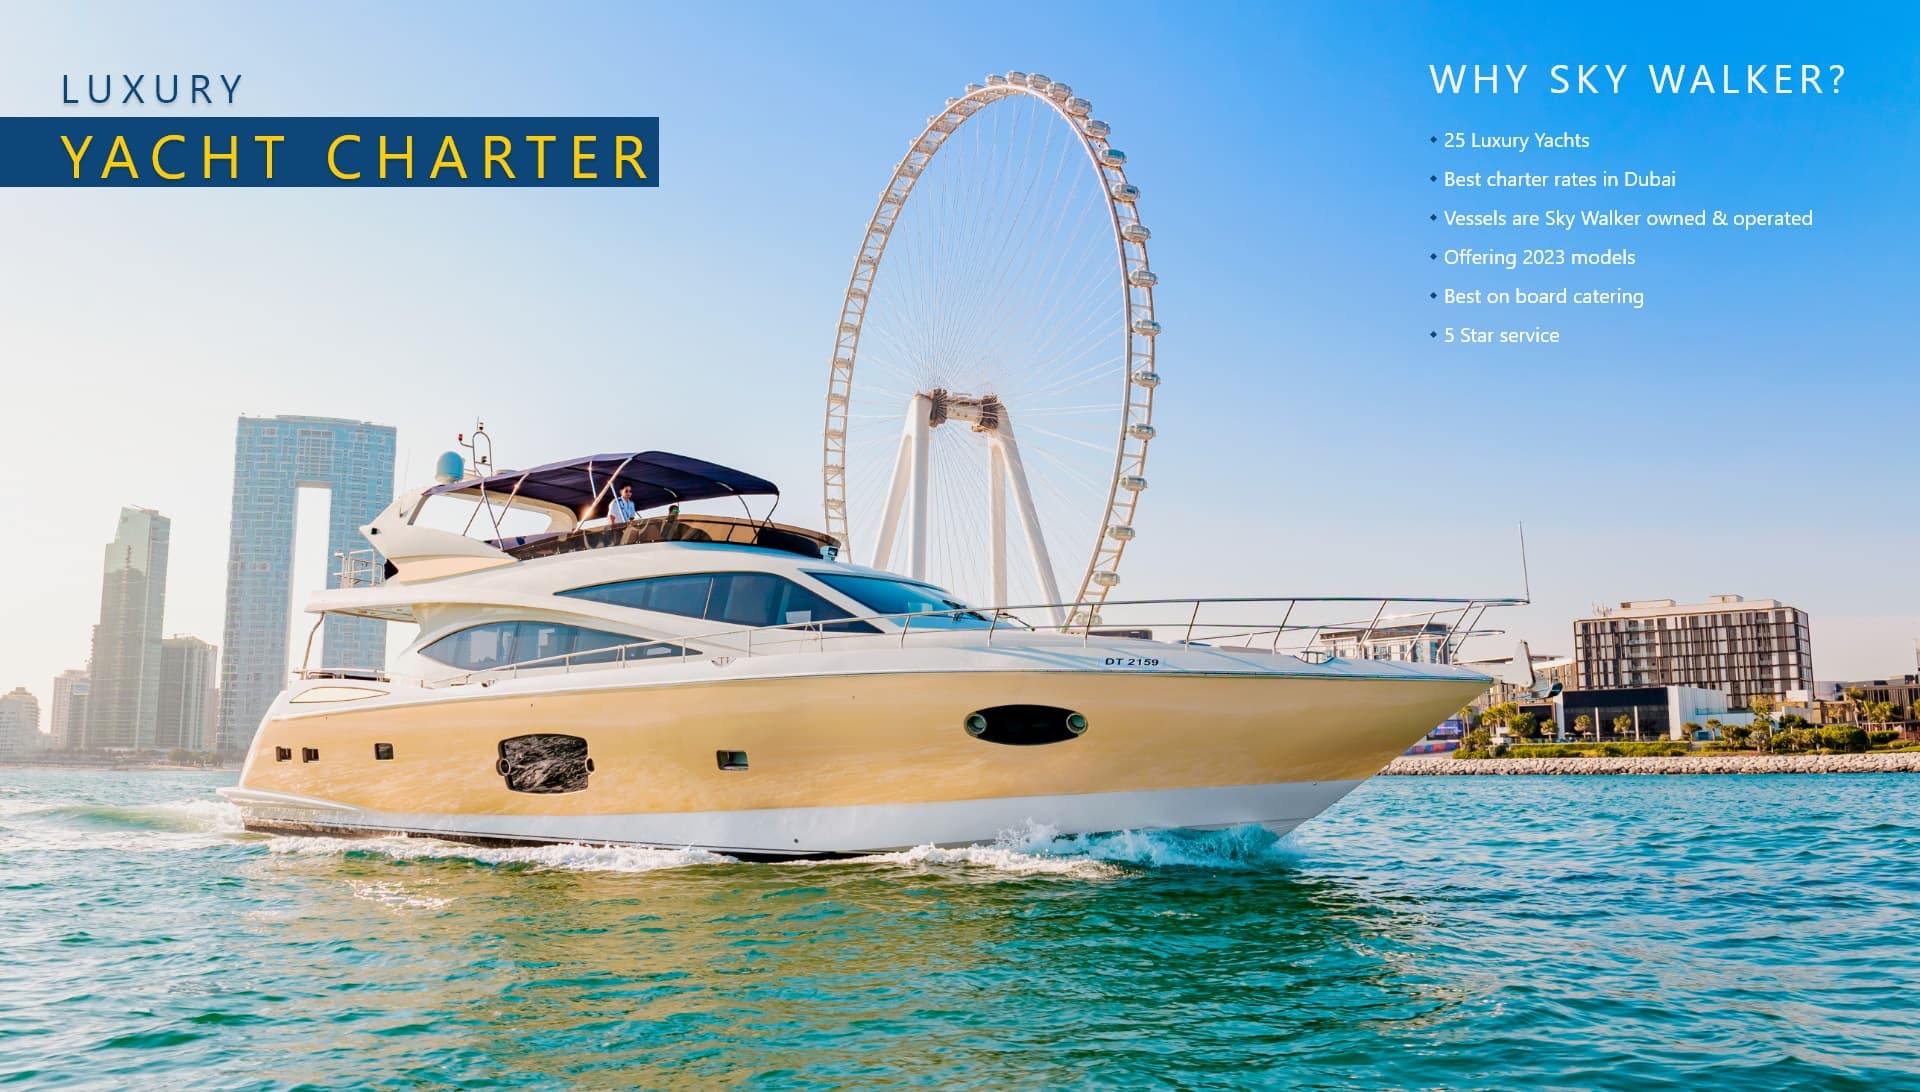 Yacht Rental Dubai | Yacht Booking Dubai | Yacht Rental Dubai, Rent a yacht or a boat for cruises, fishing and watersports for best prices.